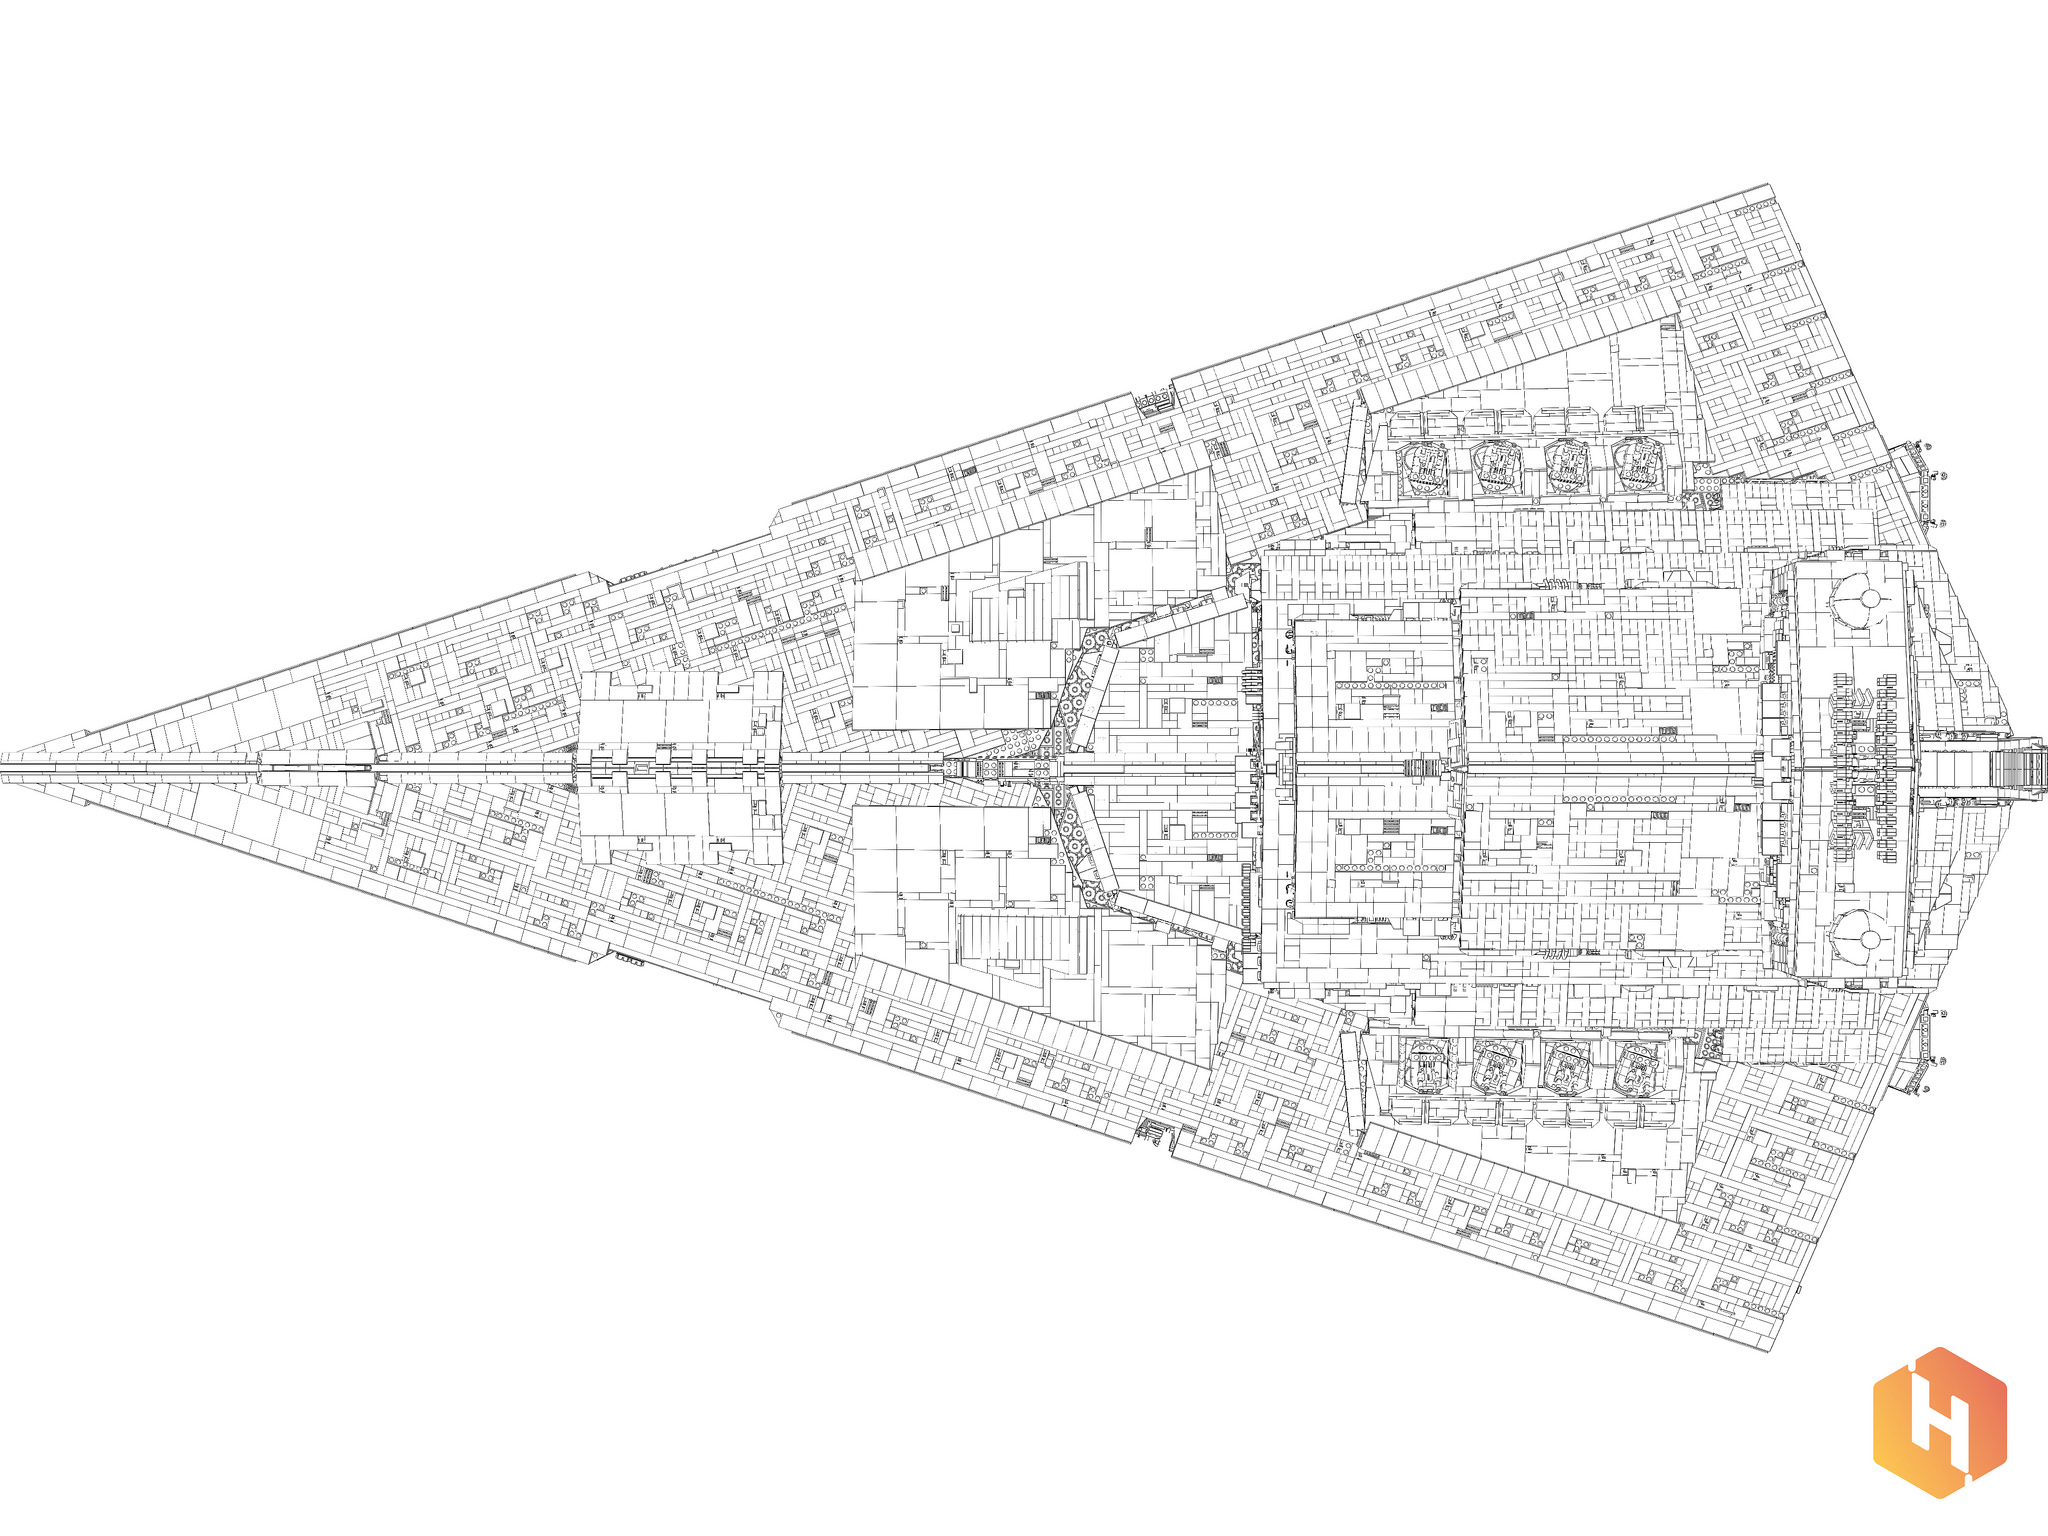 Look At This Enormous LEGO Star Destroyer